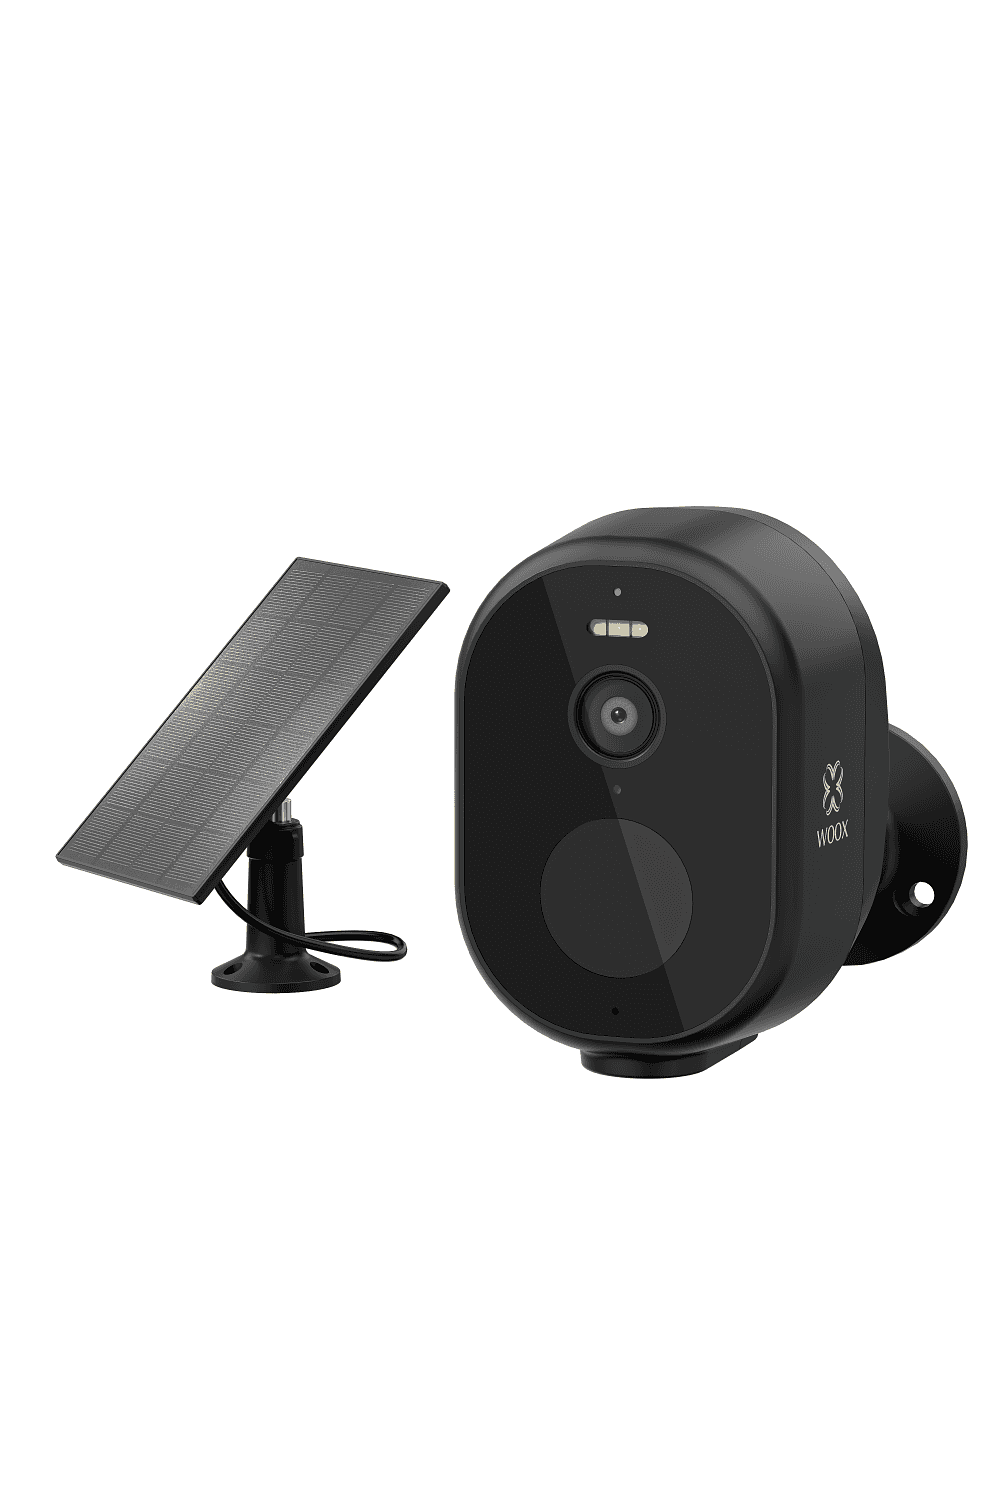 WOOX outdoor wireless security camera | R4252